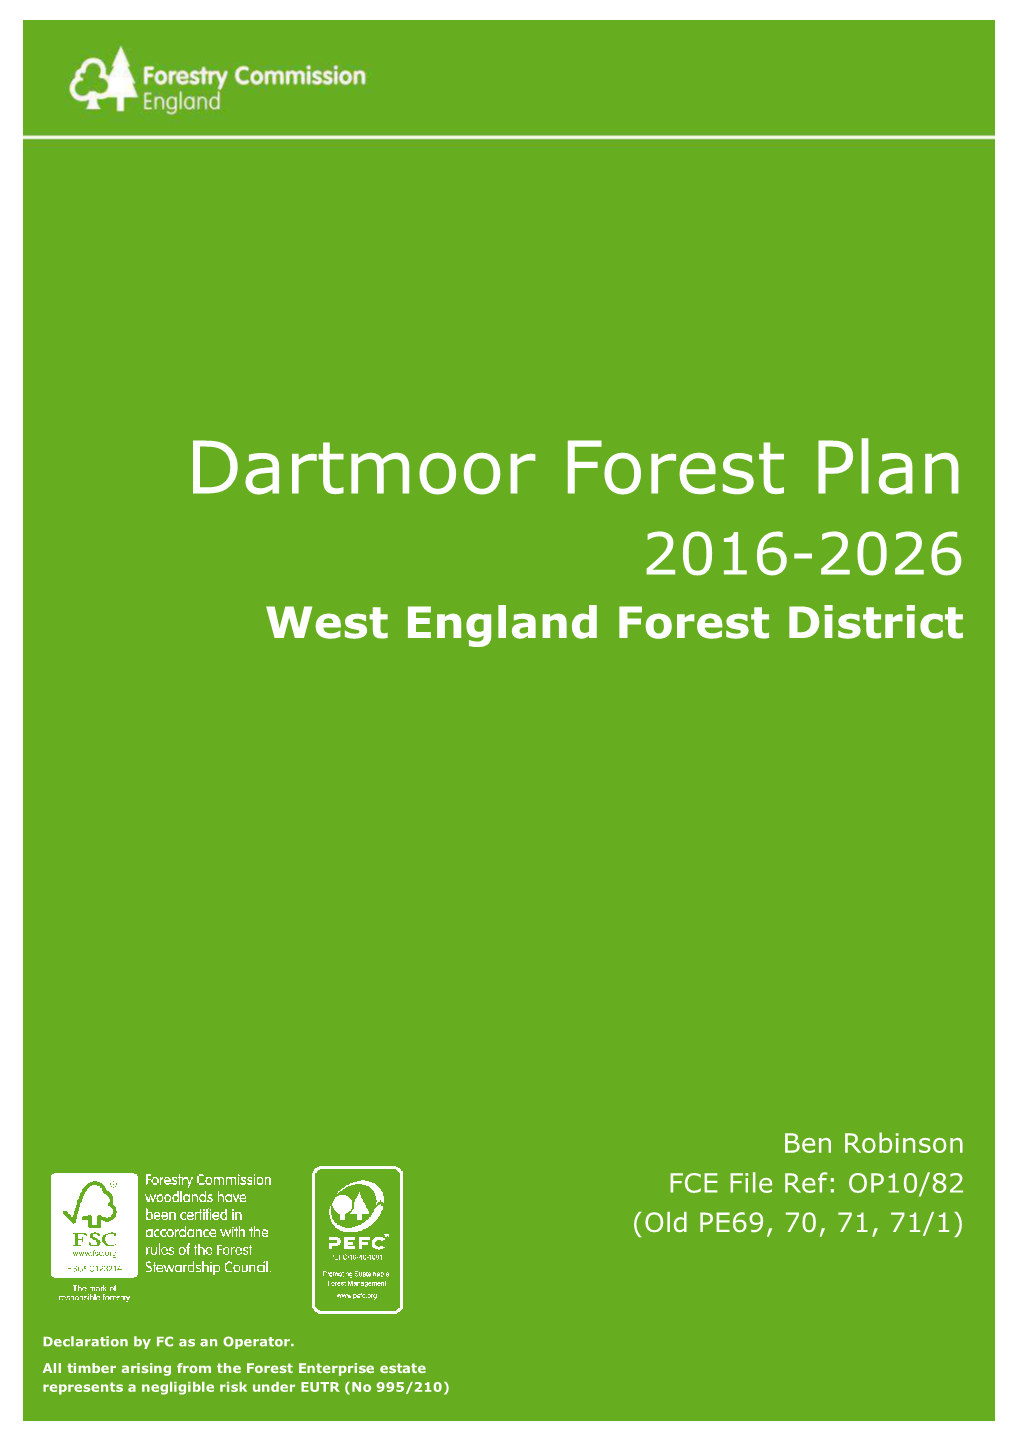 Dartmoor Forest Plan 2016 - 2026 Page 1